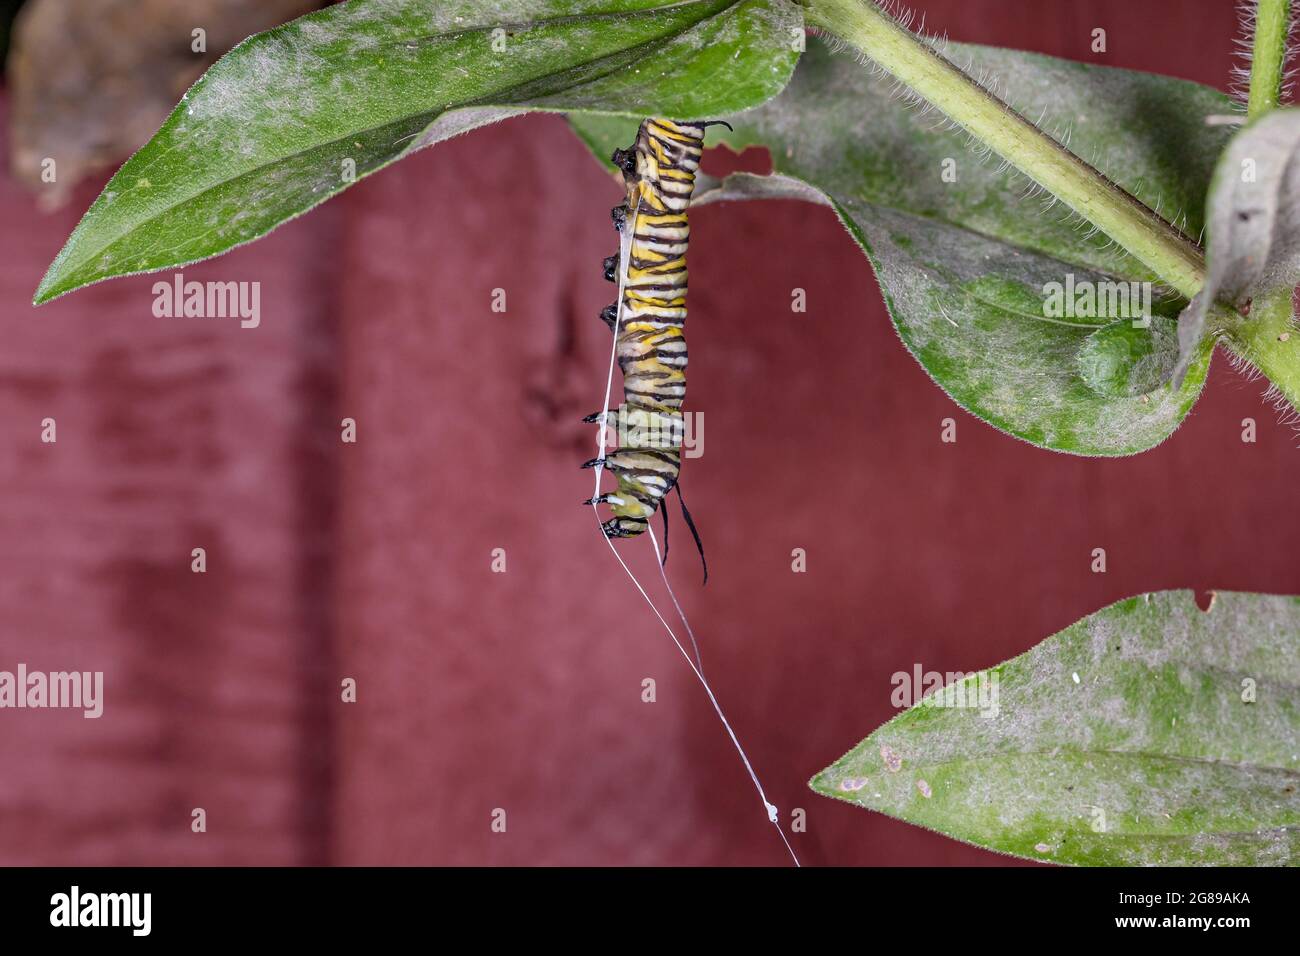 Monarch butterfly caterpillar dead from Tachinid fly parasitic infection. White strands of silk hanging from body. Concept of insect and wildlife cons Stock Photo